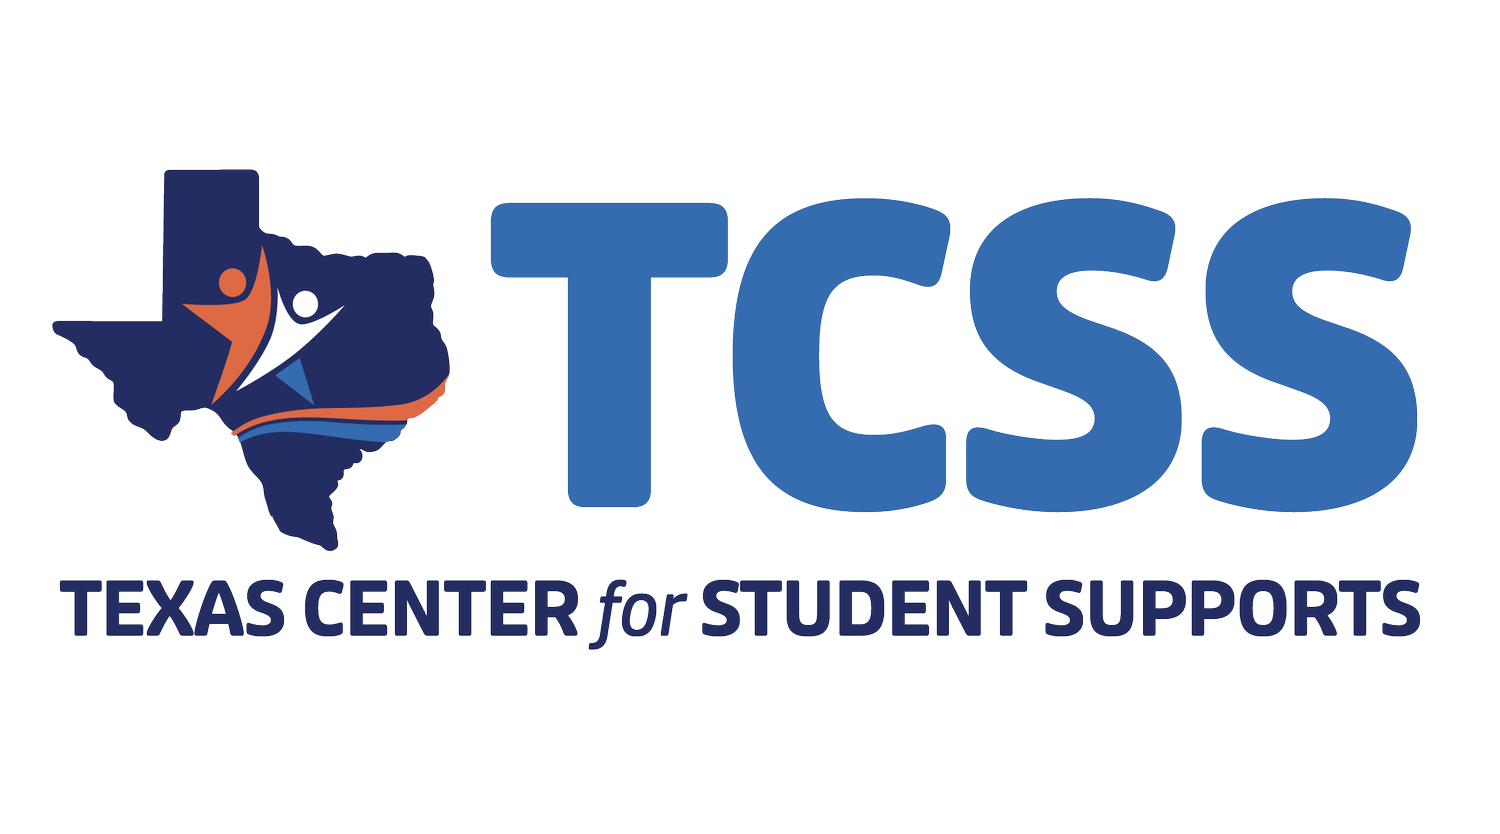 Texas Center for Student Supports